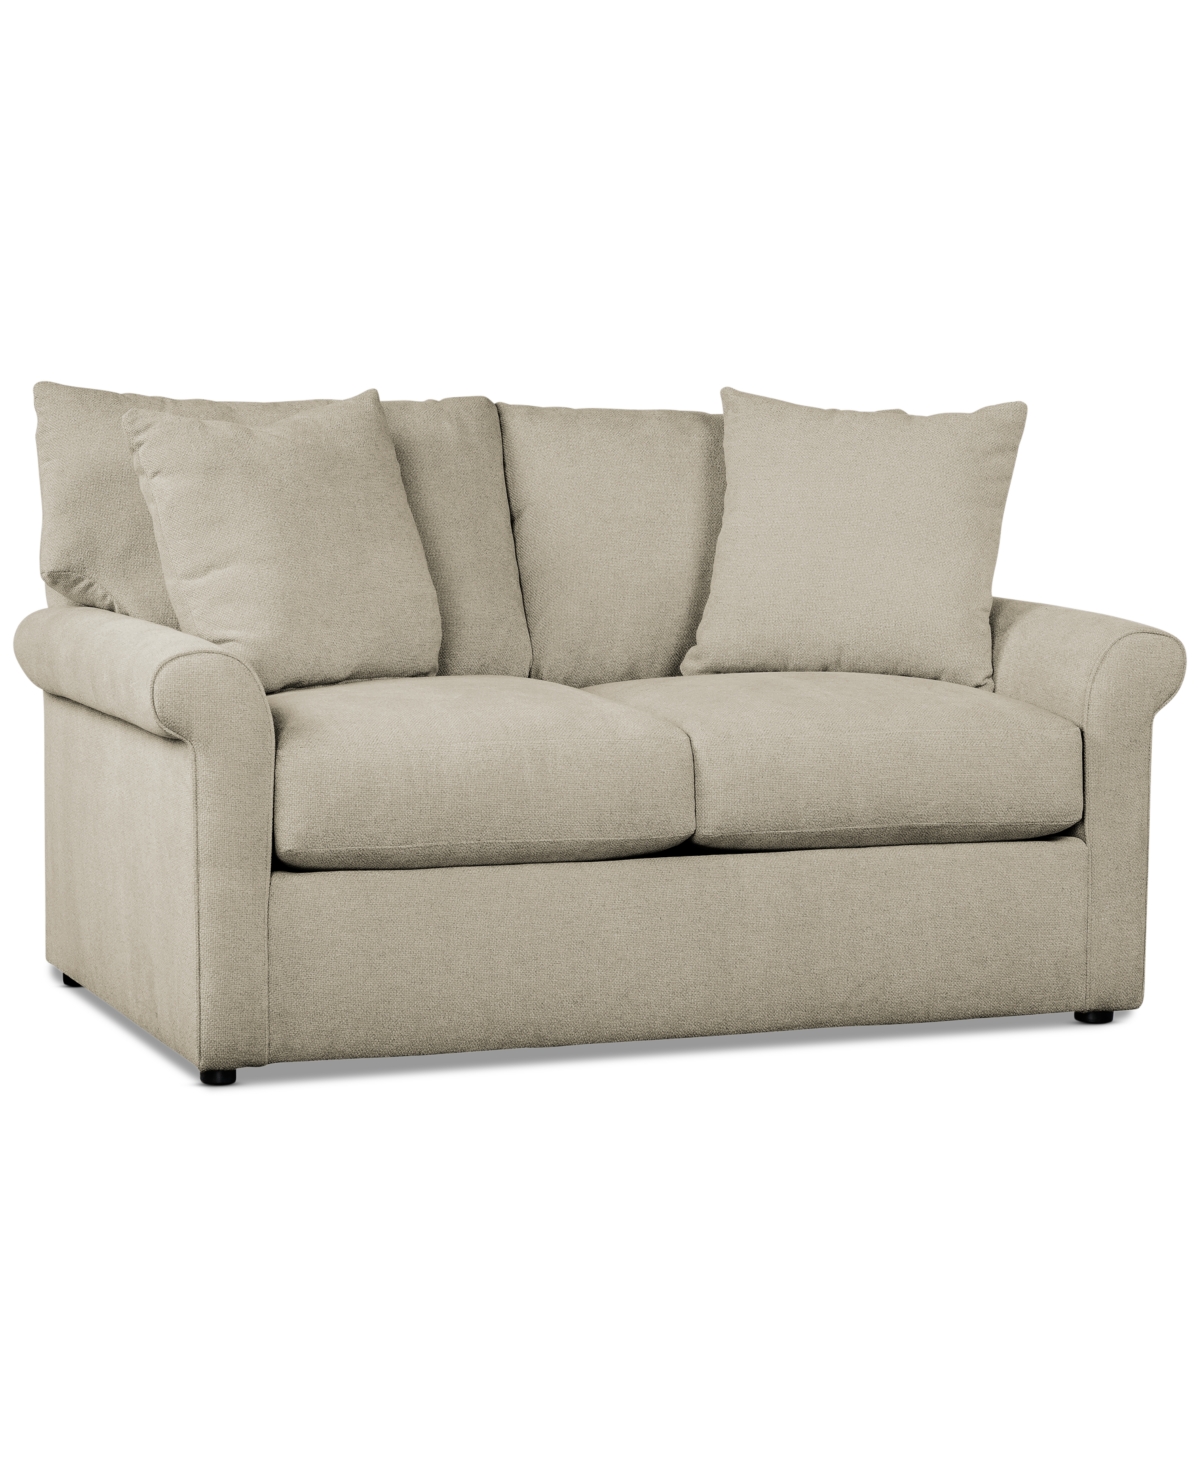 Furniture Wrenley 63" Fabric Loveseat, Created For Macy's In Dove